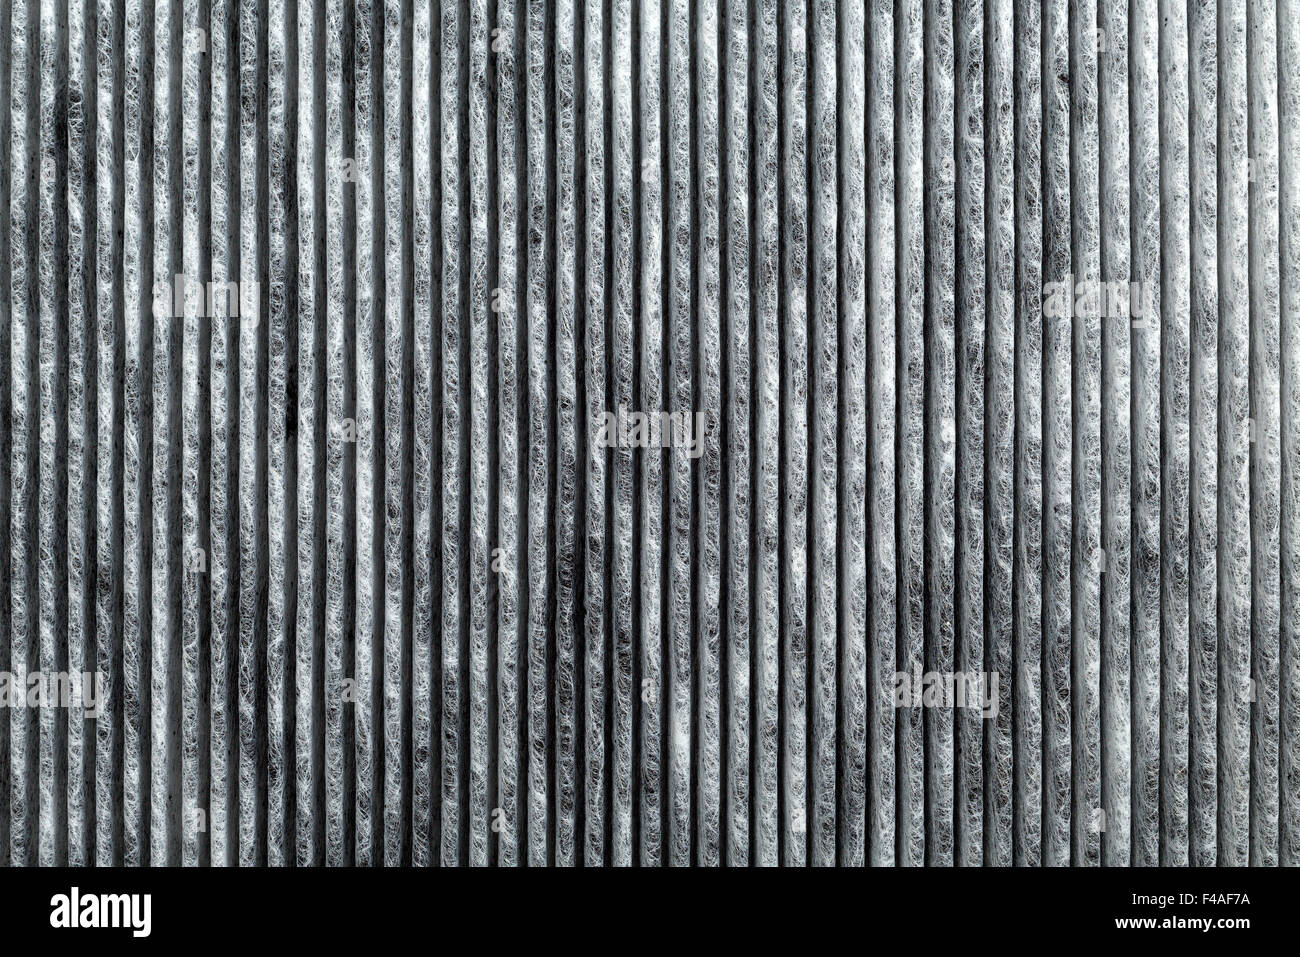 Close-up of car carbon cabin filter. Stock Photo